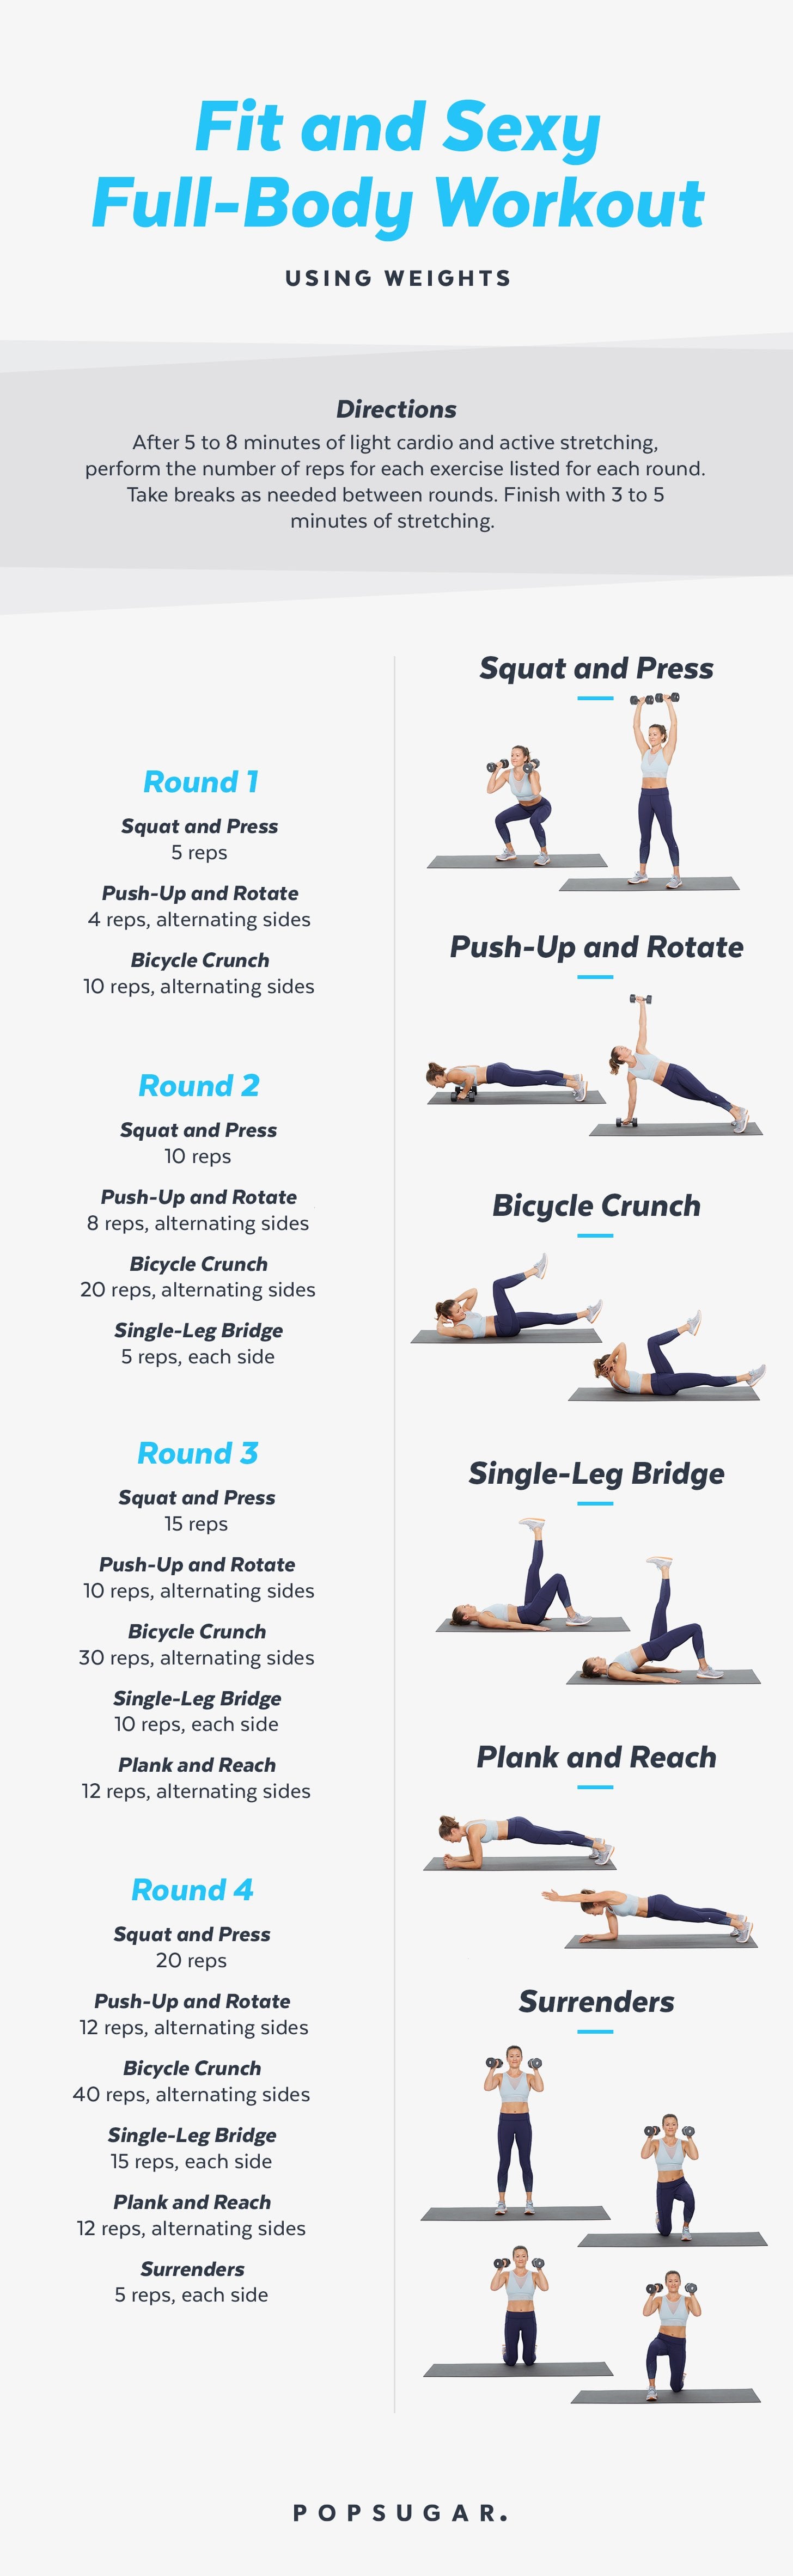 Energize Your Day Full Body Workout Without Equipment